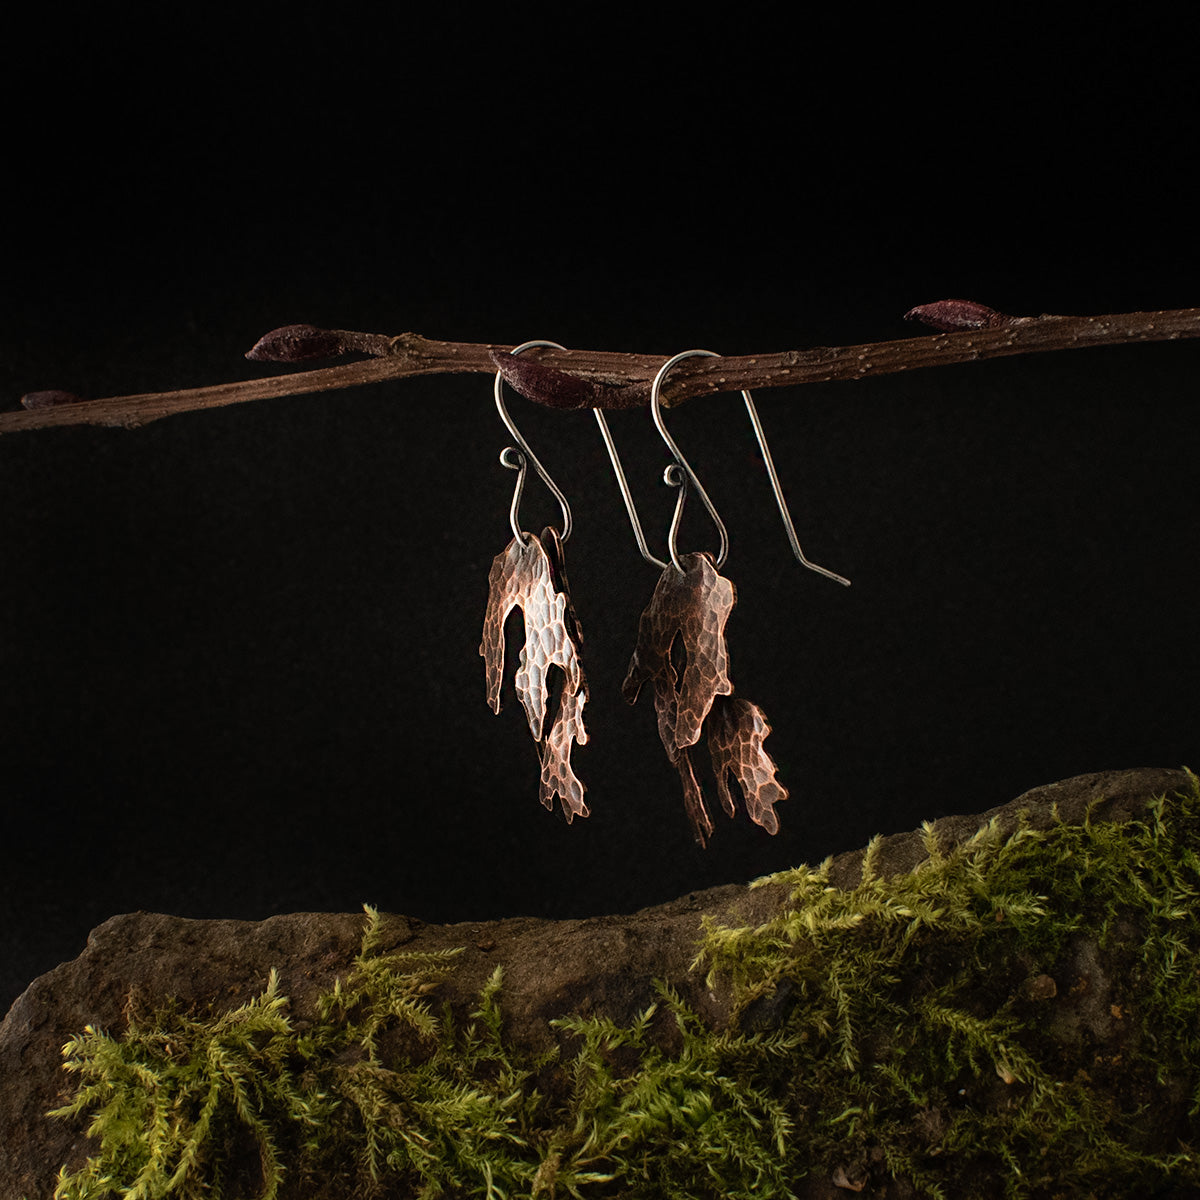 The pair of Copper Layered Lichen Earrings viewed from the side, dangling by their sterling silver ear wires.